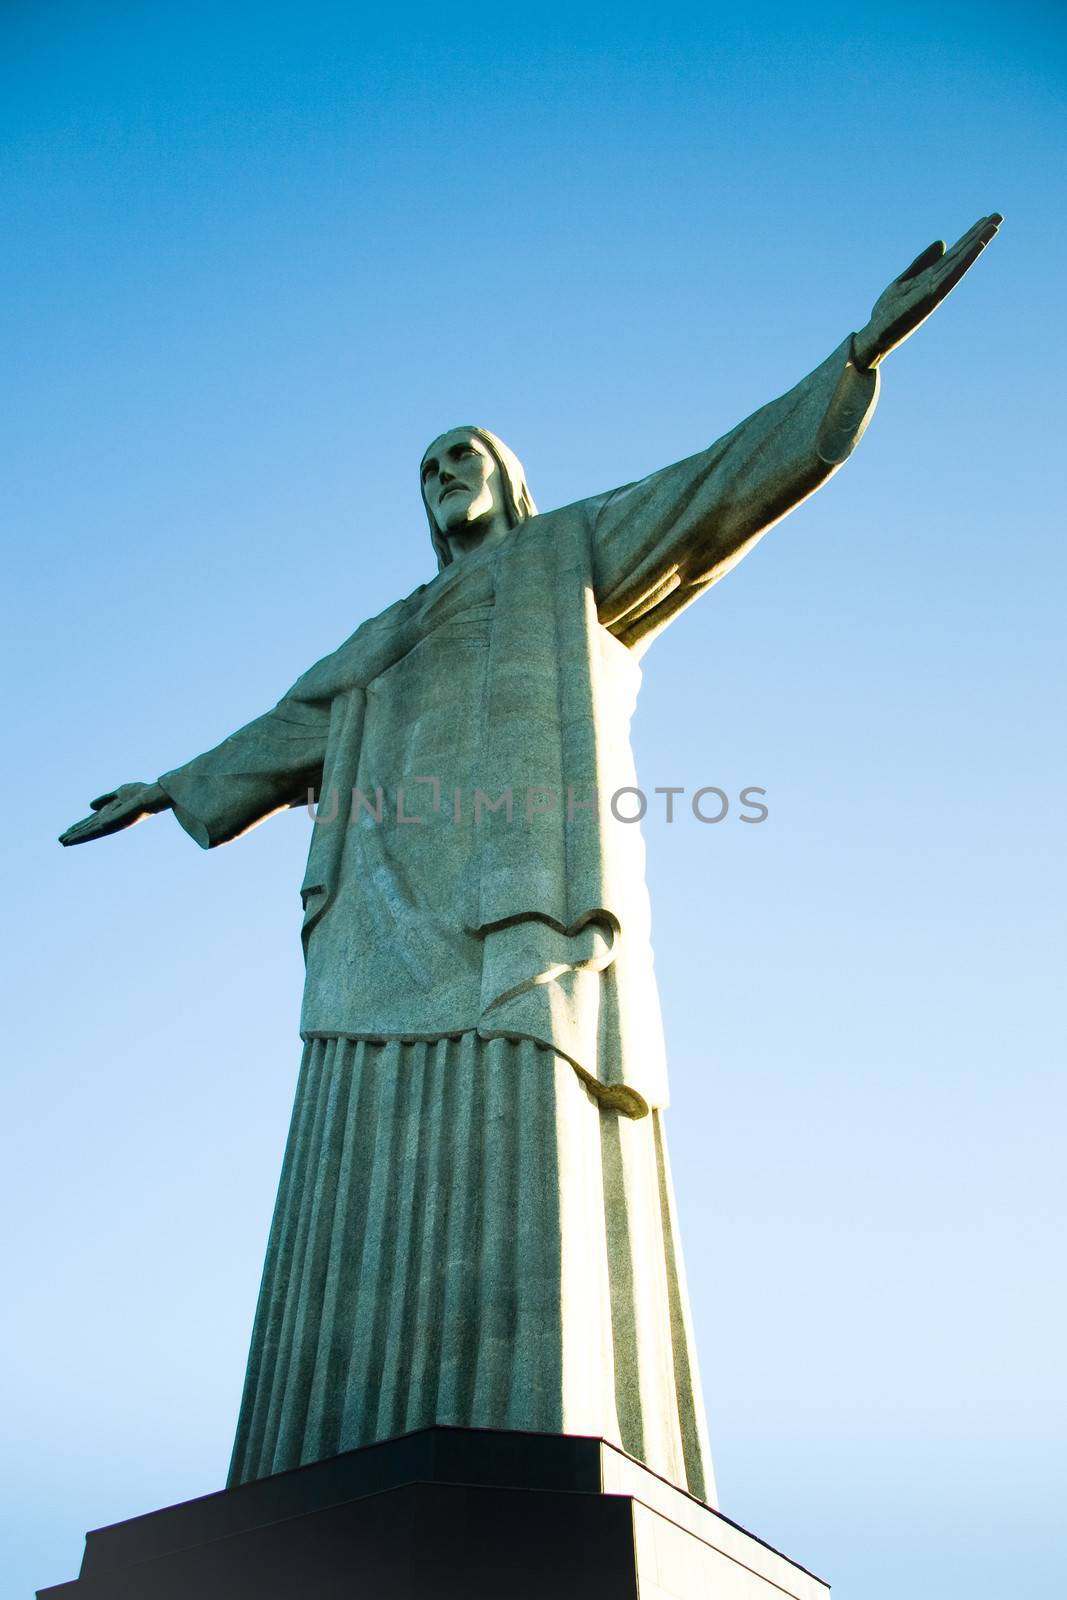 Low angle view of Christ the Redeemer statue with blue sky background, Rio de Janeiro, Brazil.